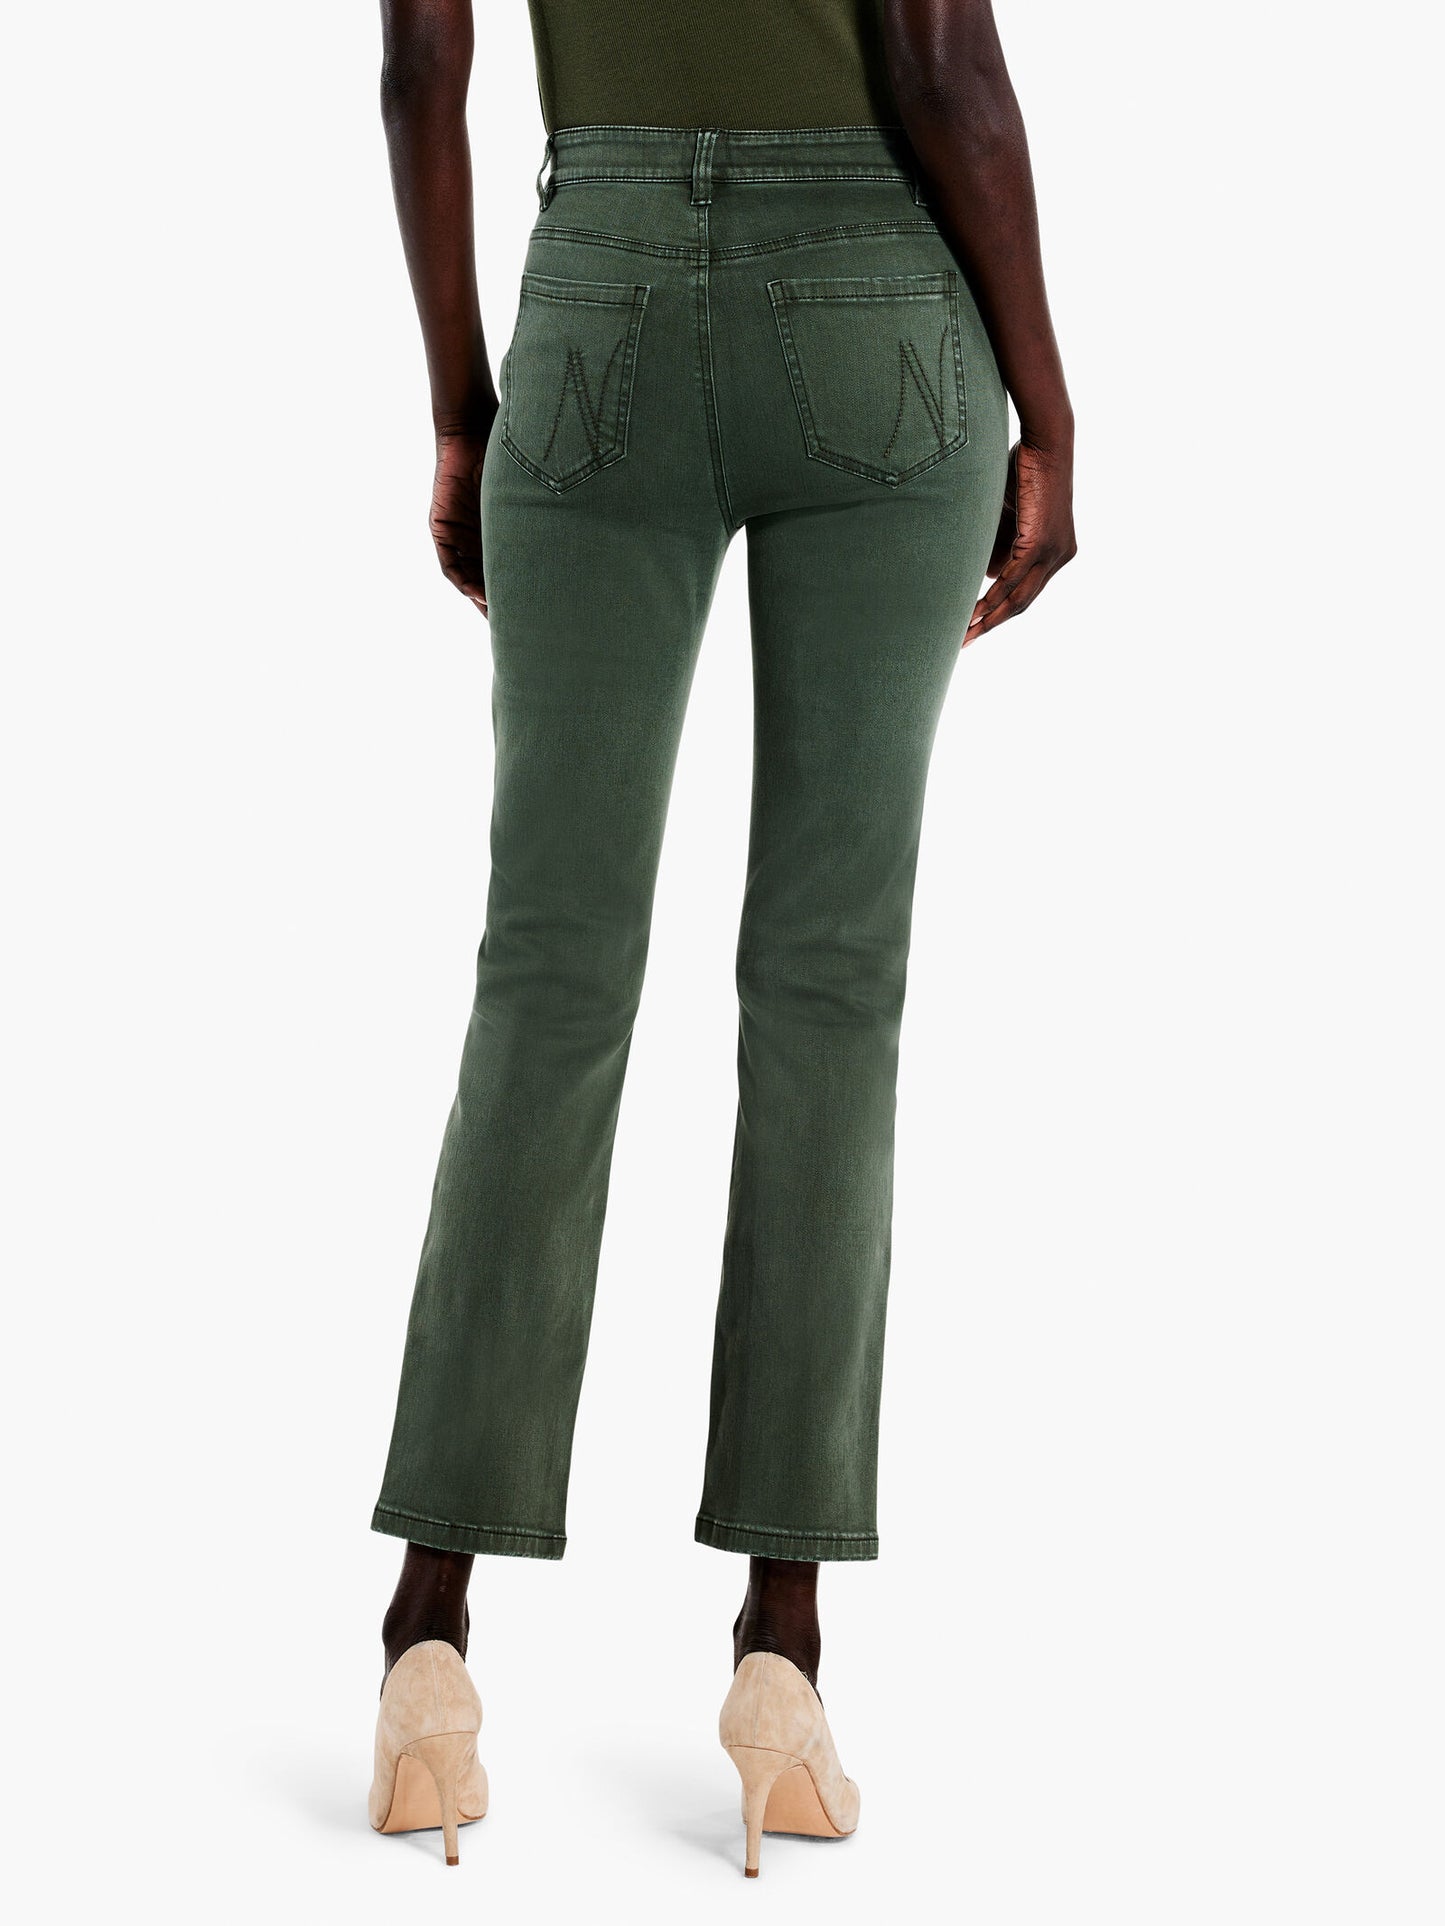 NIC+ZOE COLORED MID-RISE STRAIGHT ANKLE JEANS 28" INSEAM